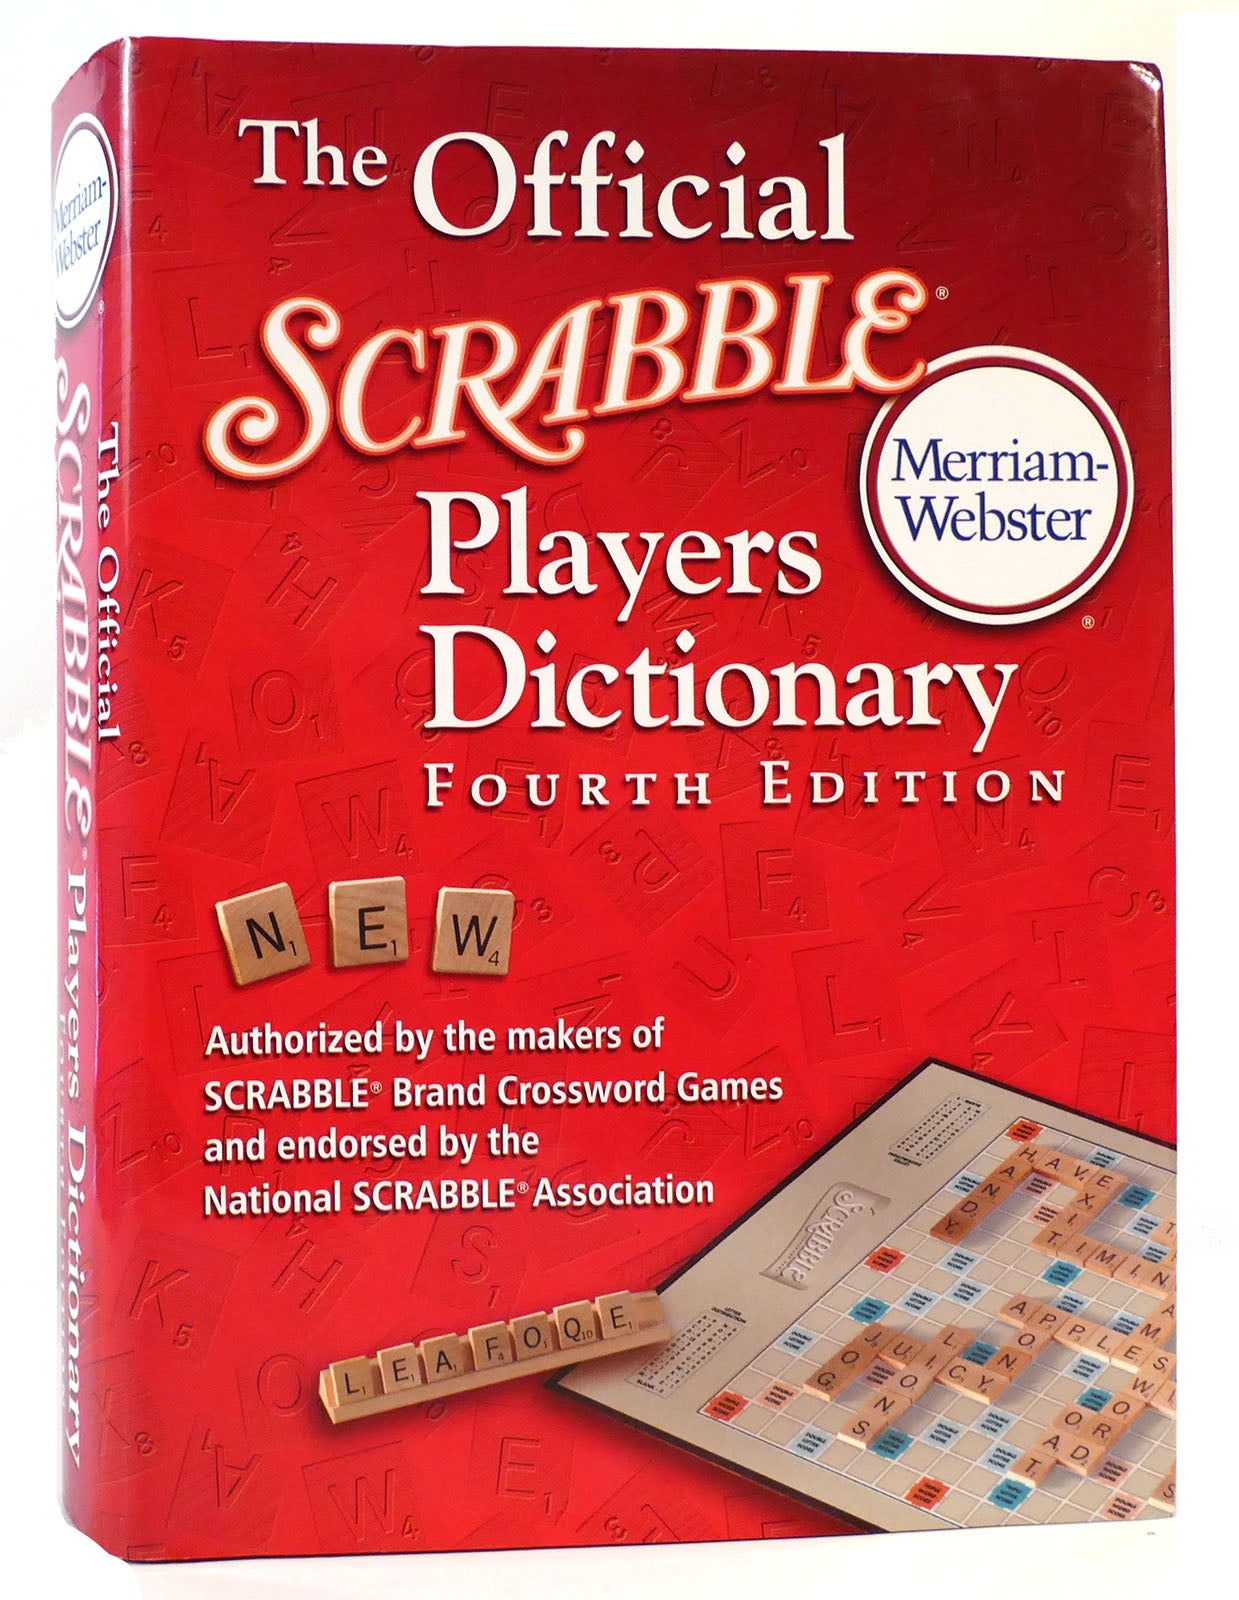 THE OFFICIAL SCRABBLE PLAYERS DICTIONARY | Merriam Webster